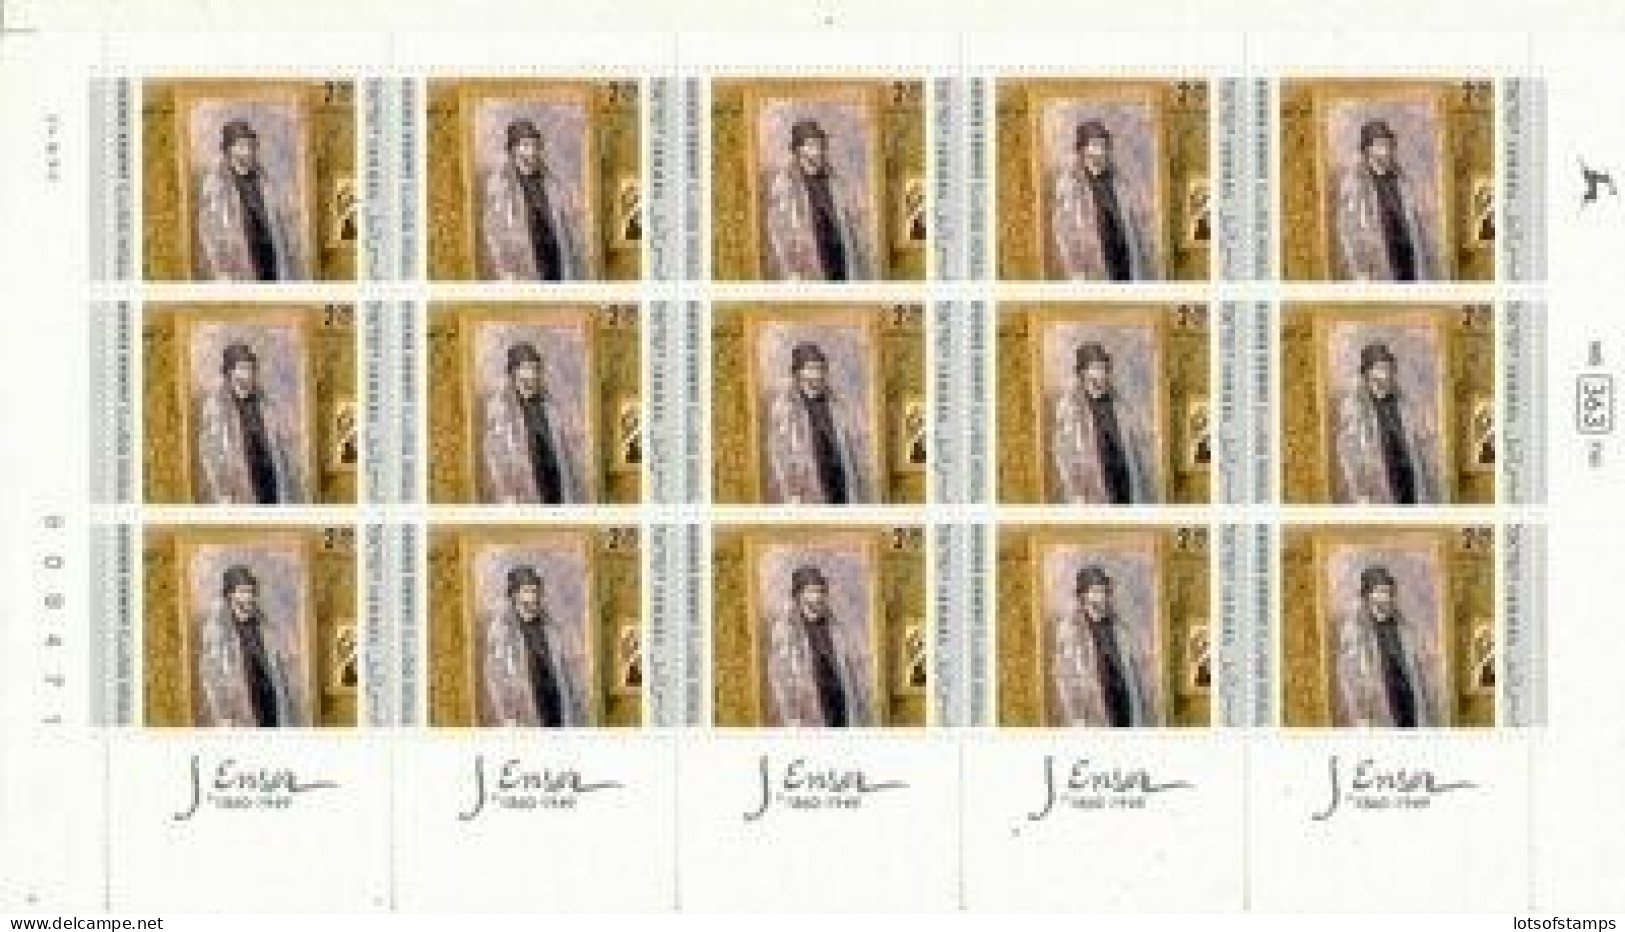 ISRAEL 1999 JOINT ISSUE WITH J. ENSOR 15 STAMP BELGIUM SHEET MNH - Briefe U. Dokumente